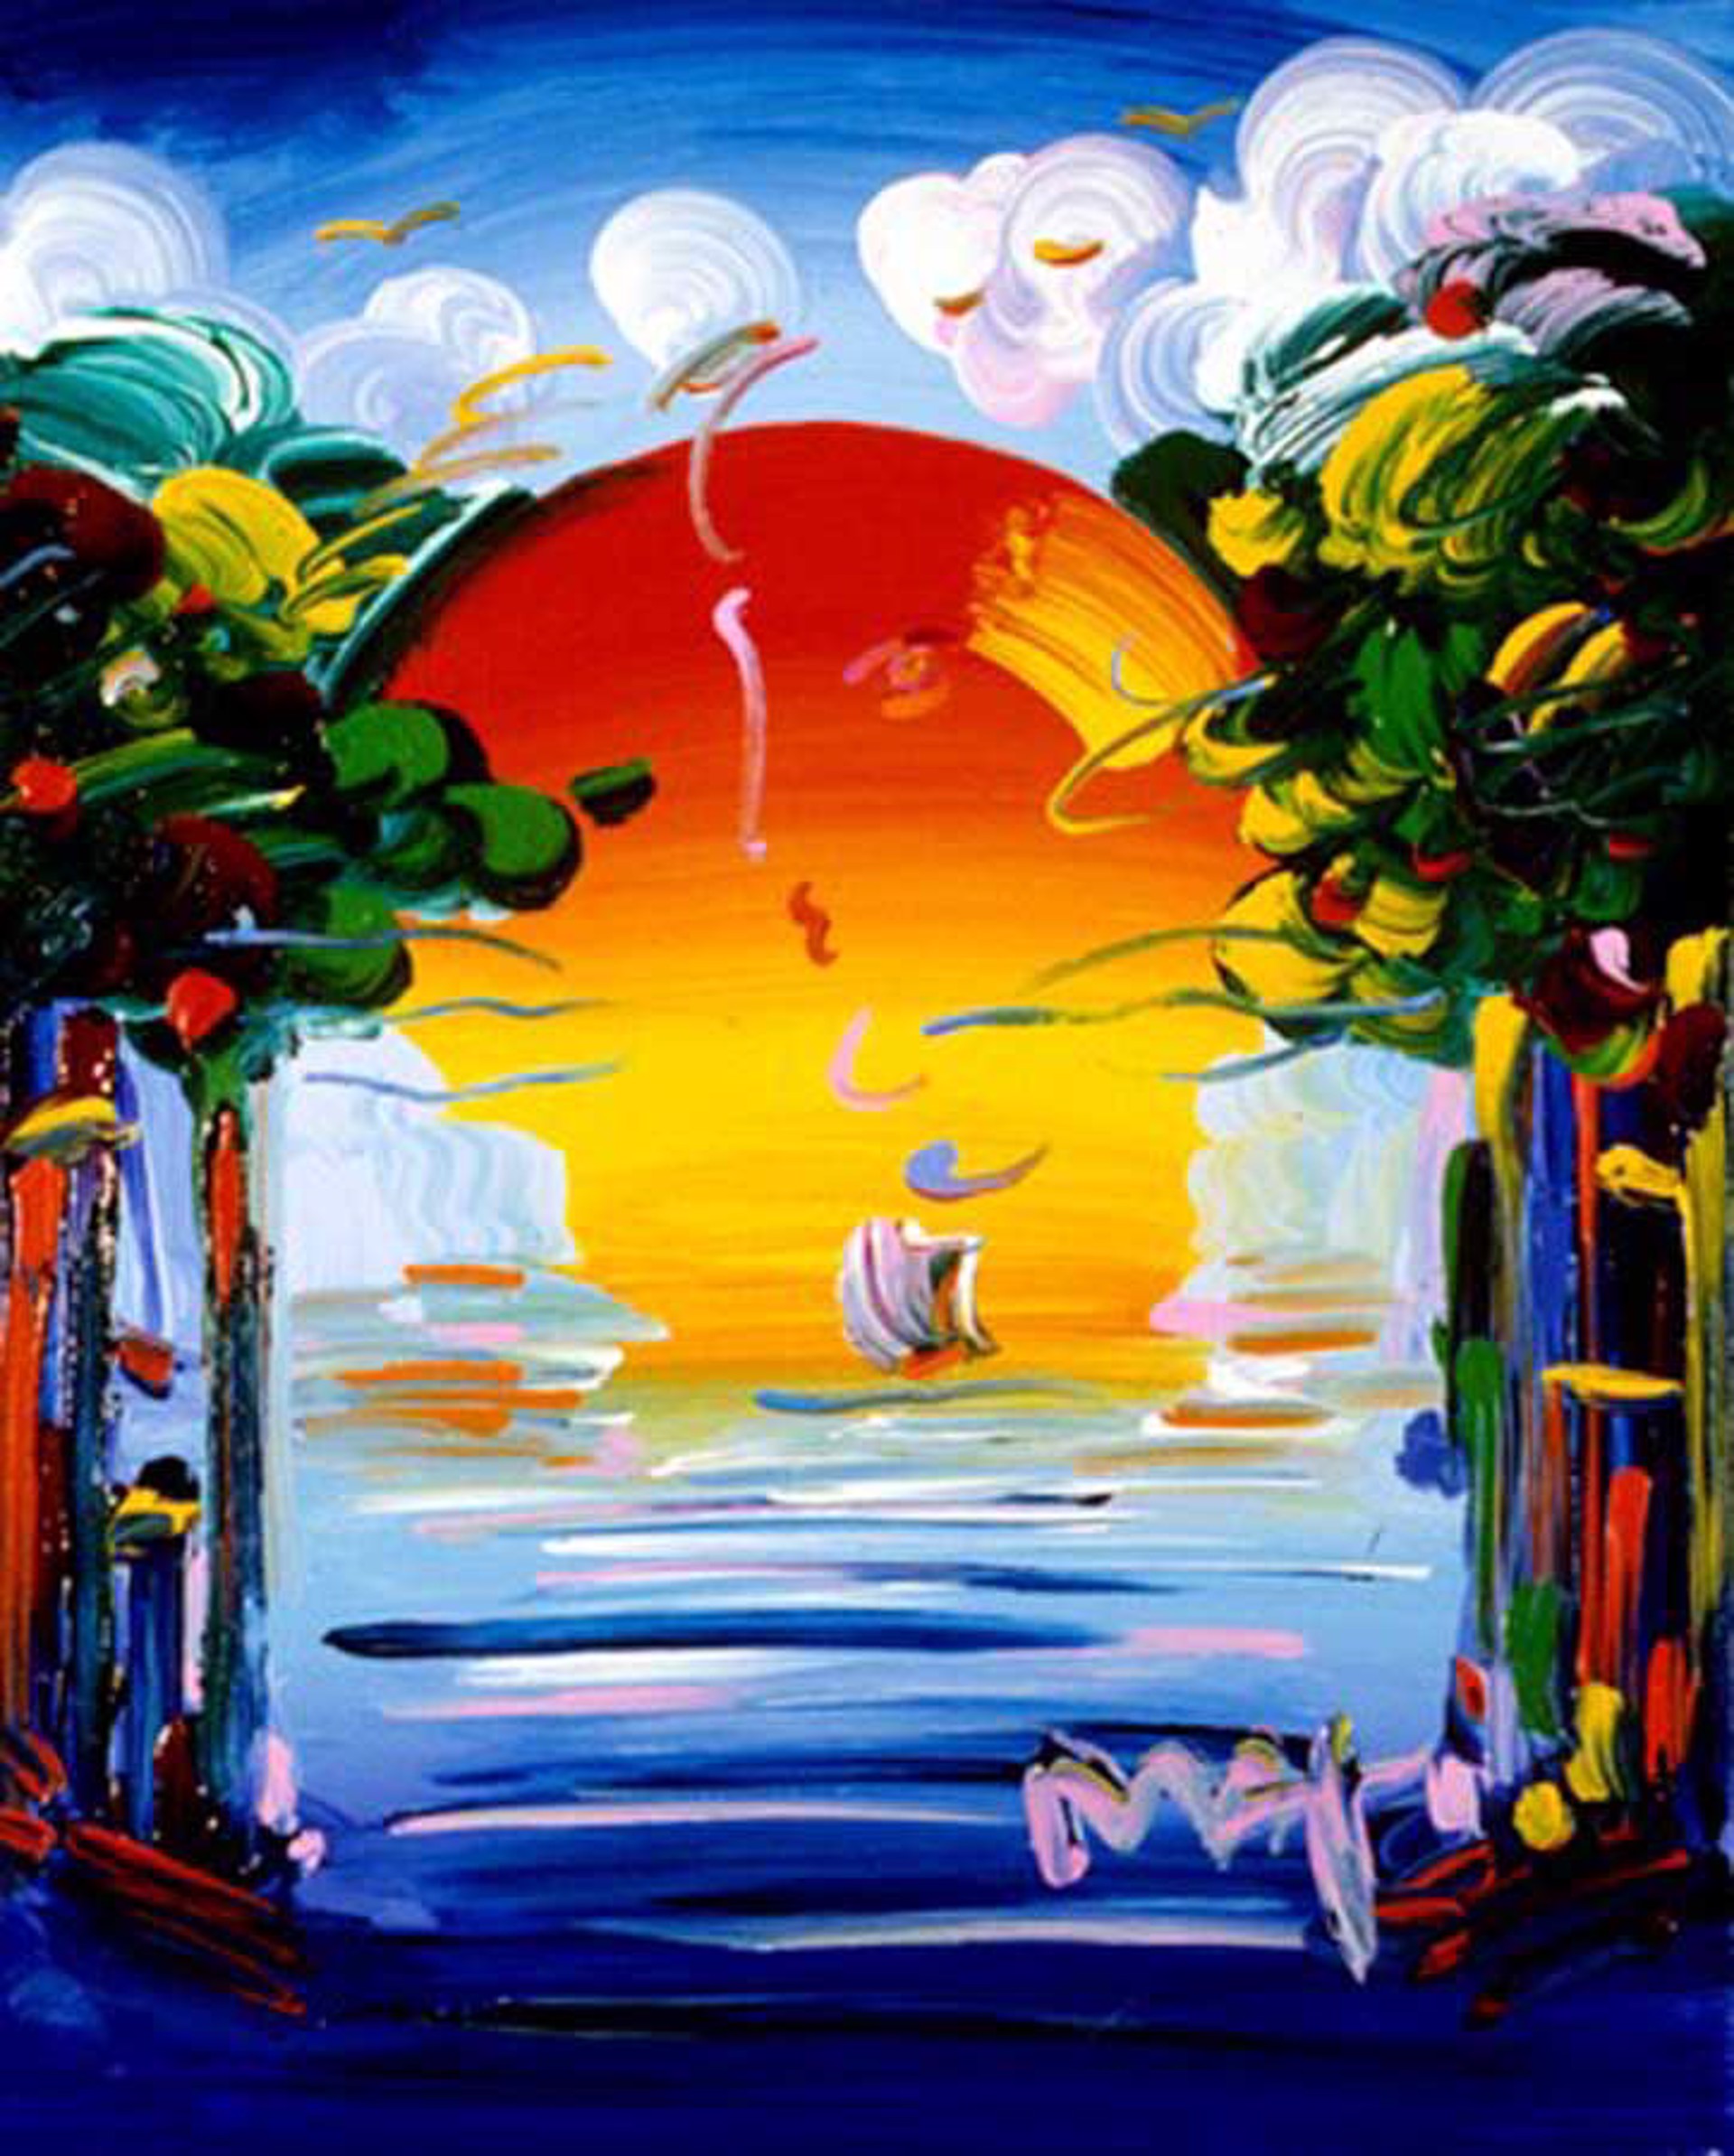 Better World by Peter Max